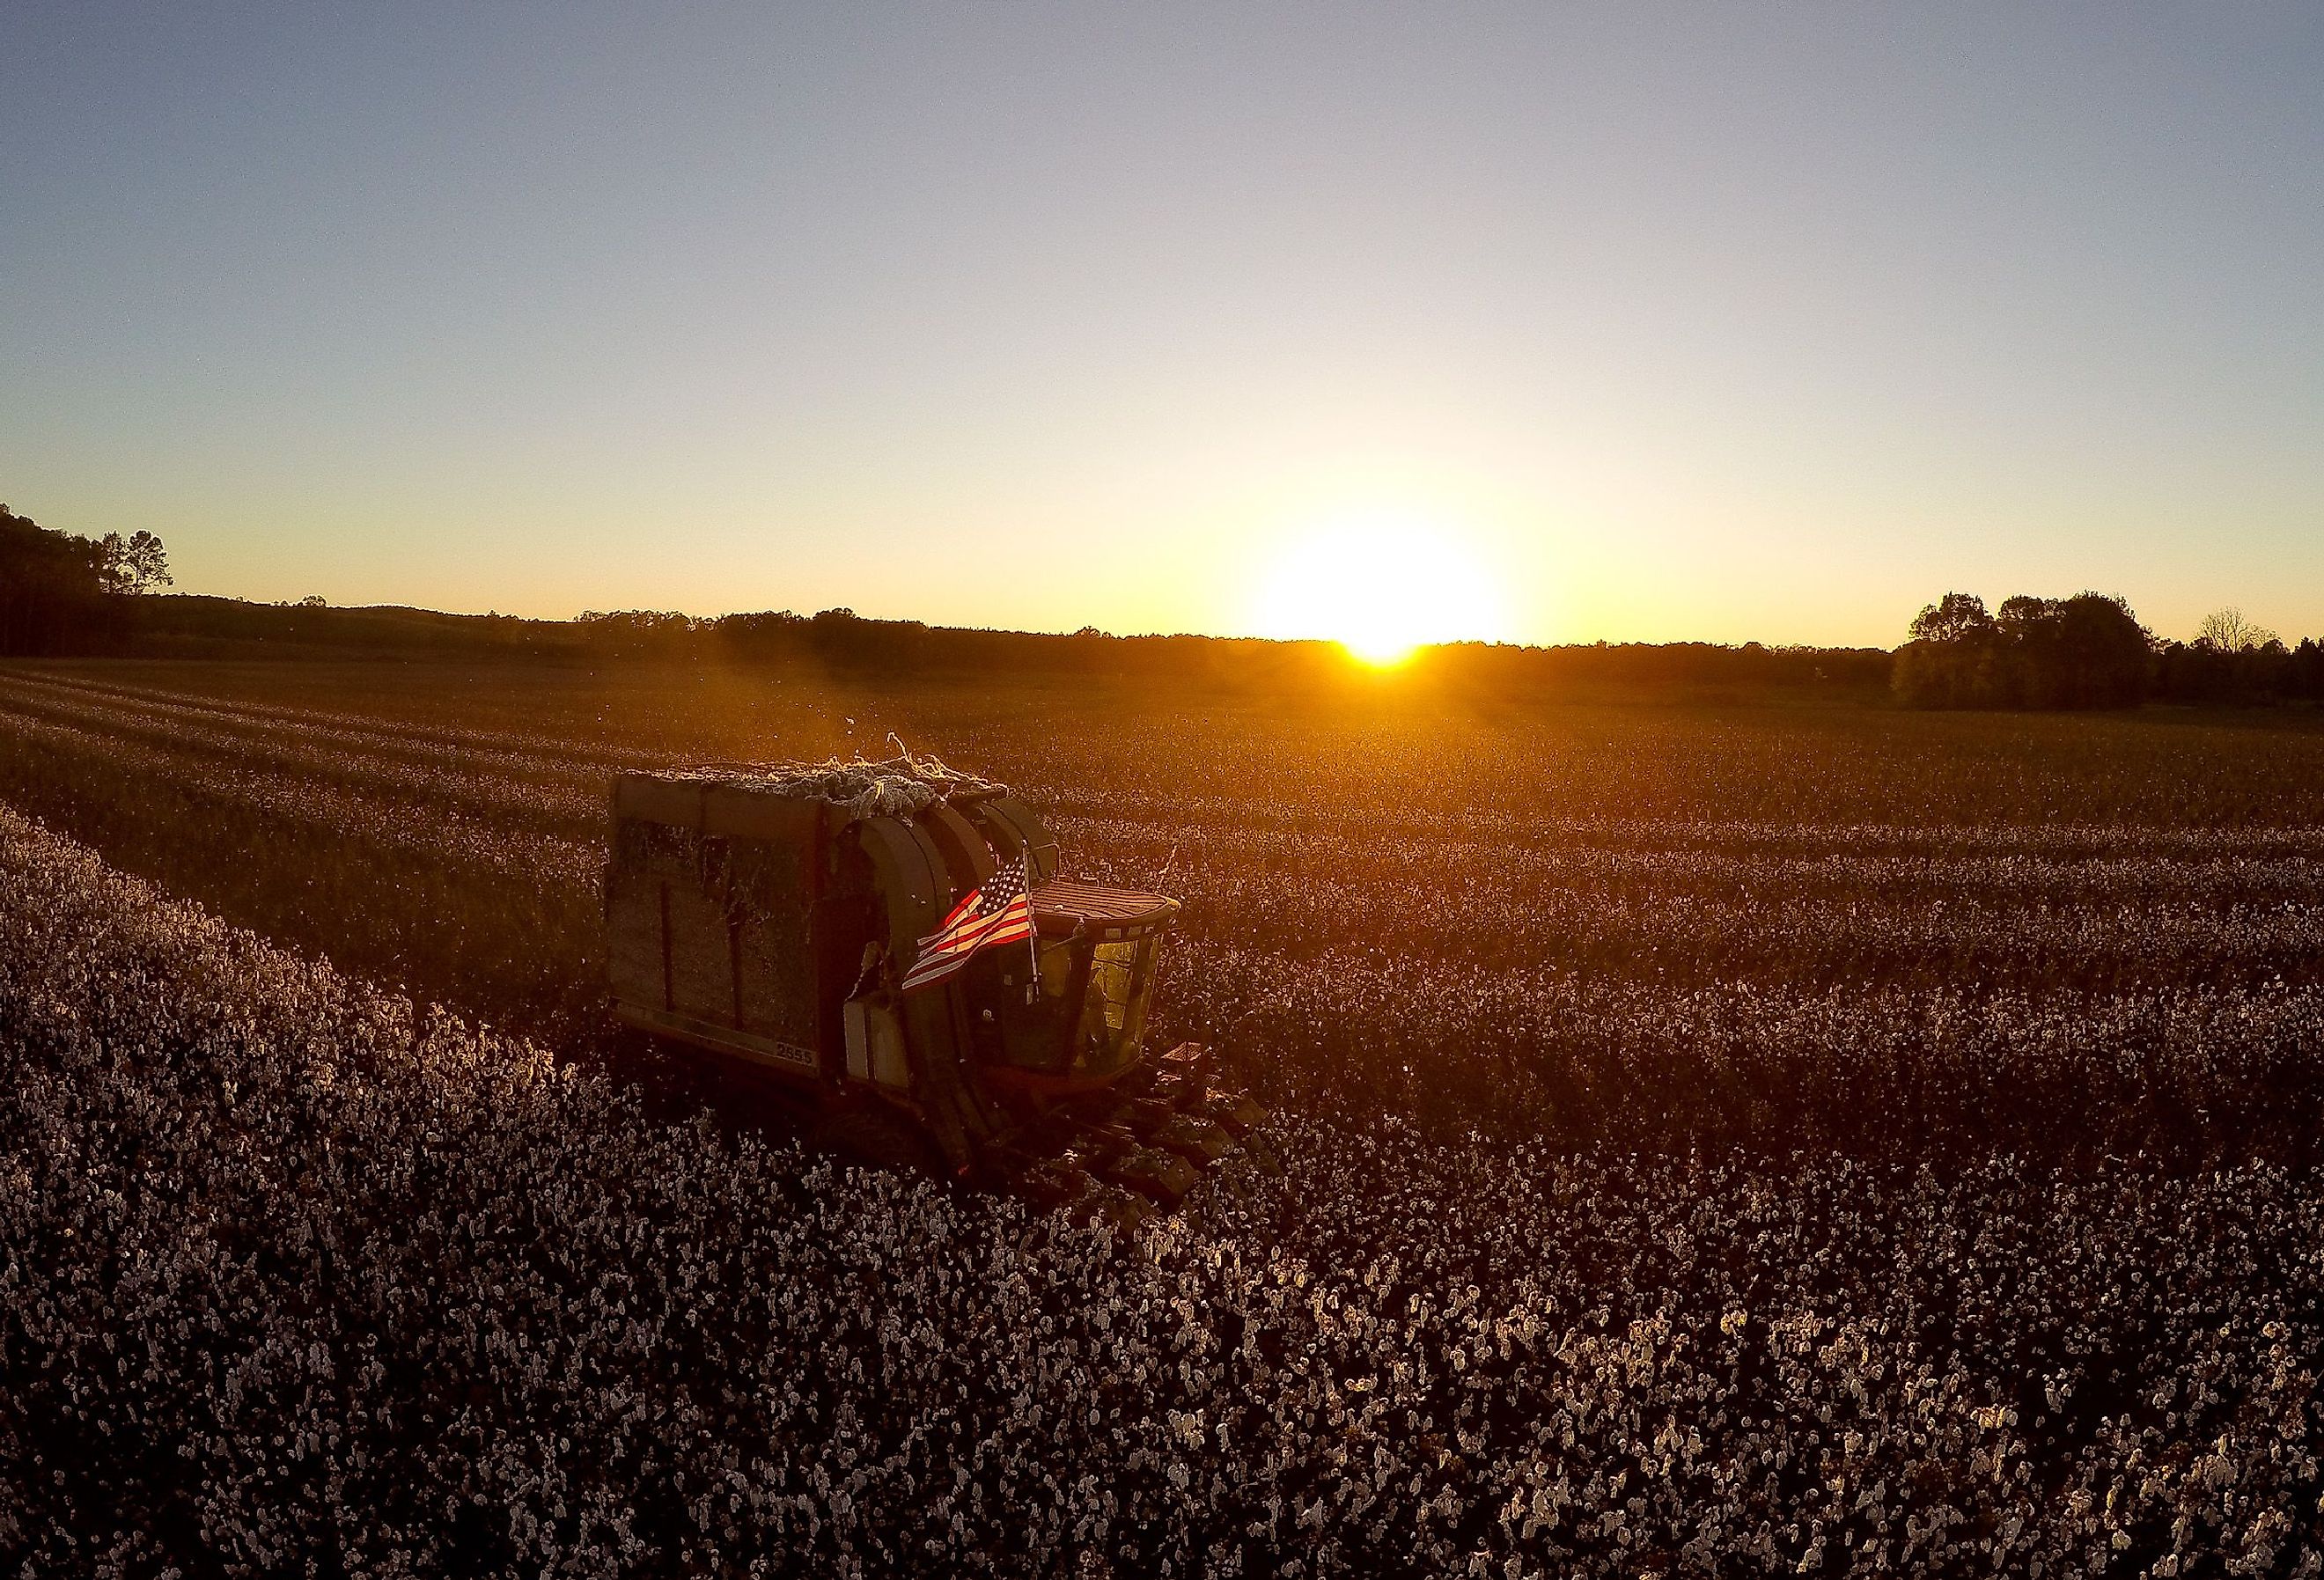 Beautiful cotton field sunset in Mississippi. Image credit CIRI Photography via Shutterstock